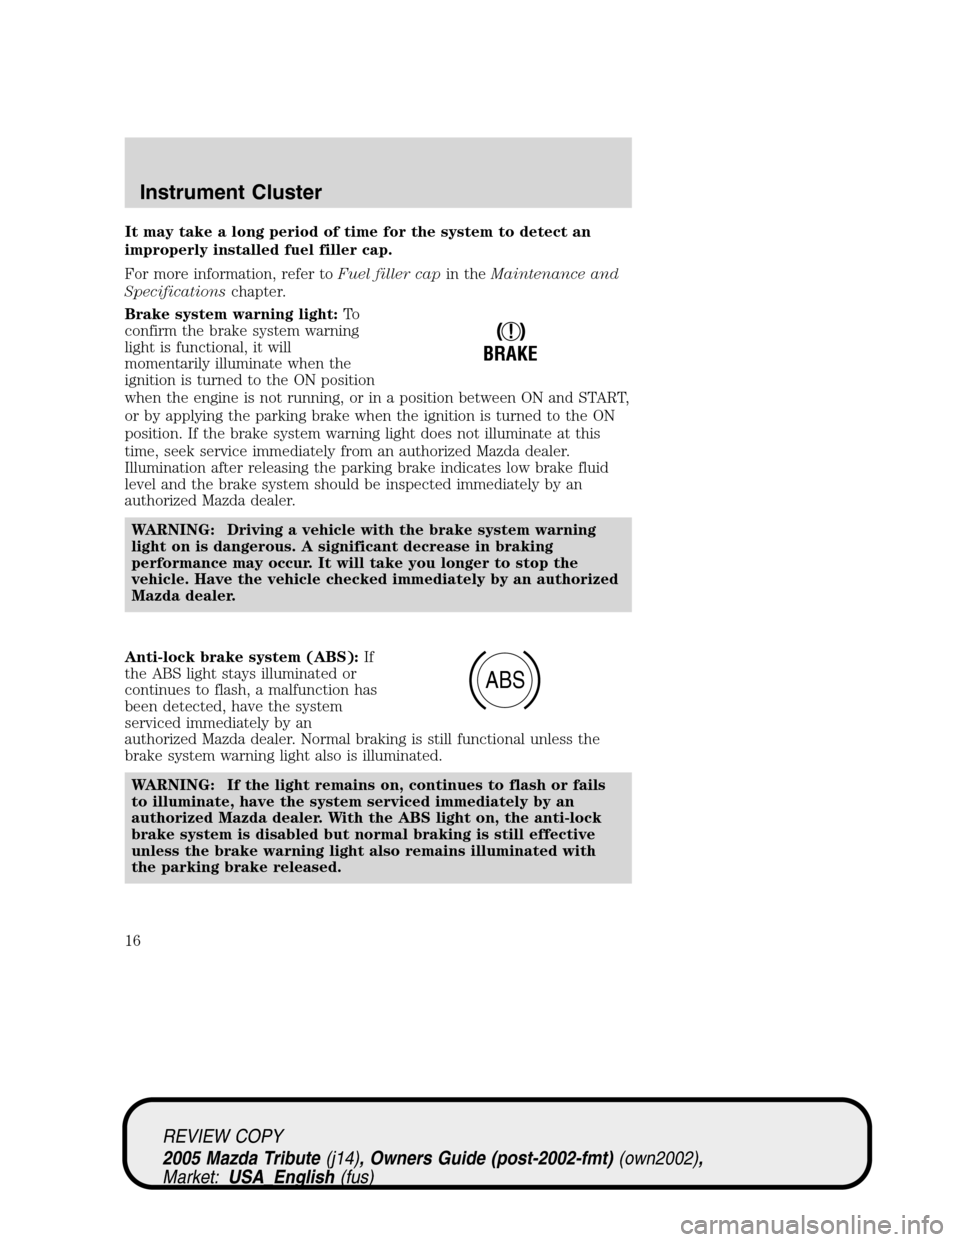 MAZDA MODEL TRIBUTE 2005  Owners Manual (in English) It may take a long period of time for the system to detect an
improperly installed fuel filler cap.
For more information, refer toFuel filler capin theMaintenance and
Specificationschapter.
Brake syst